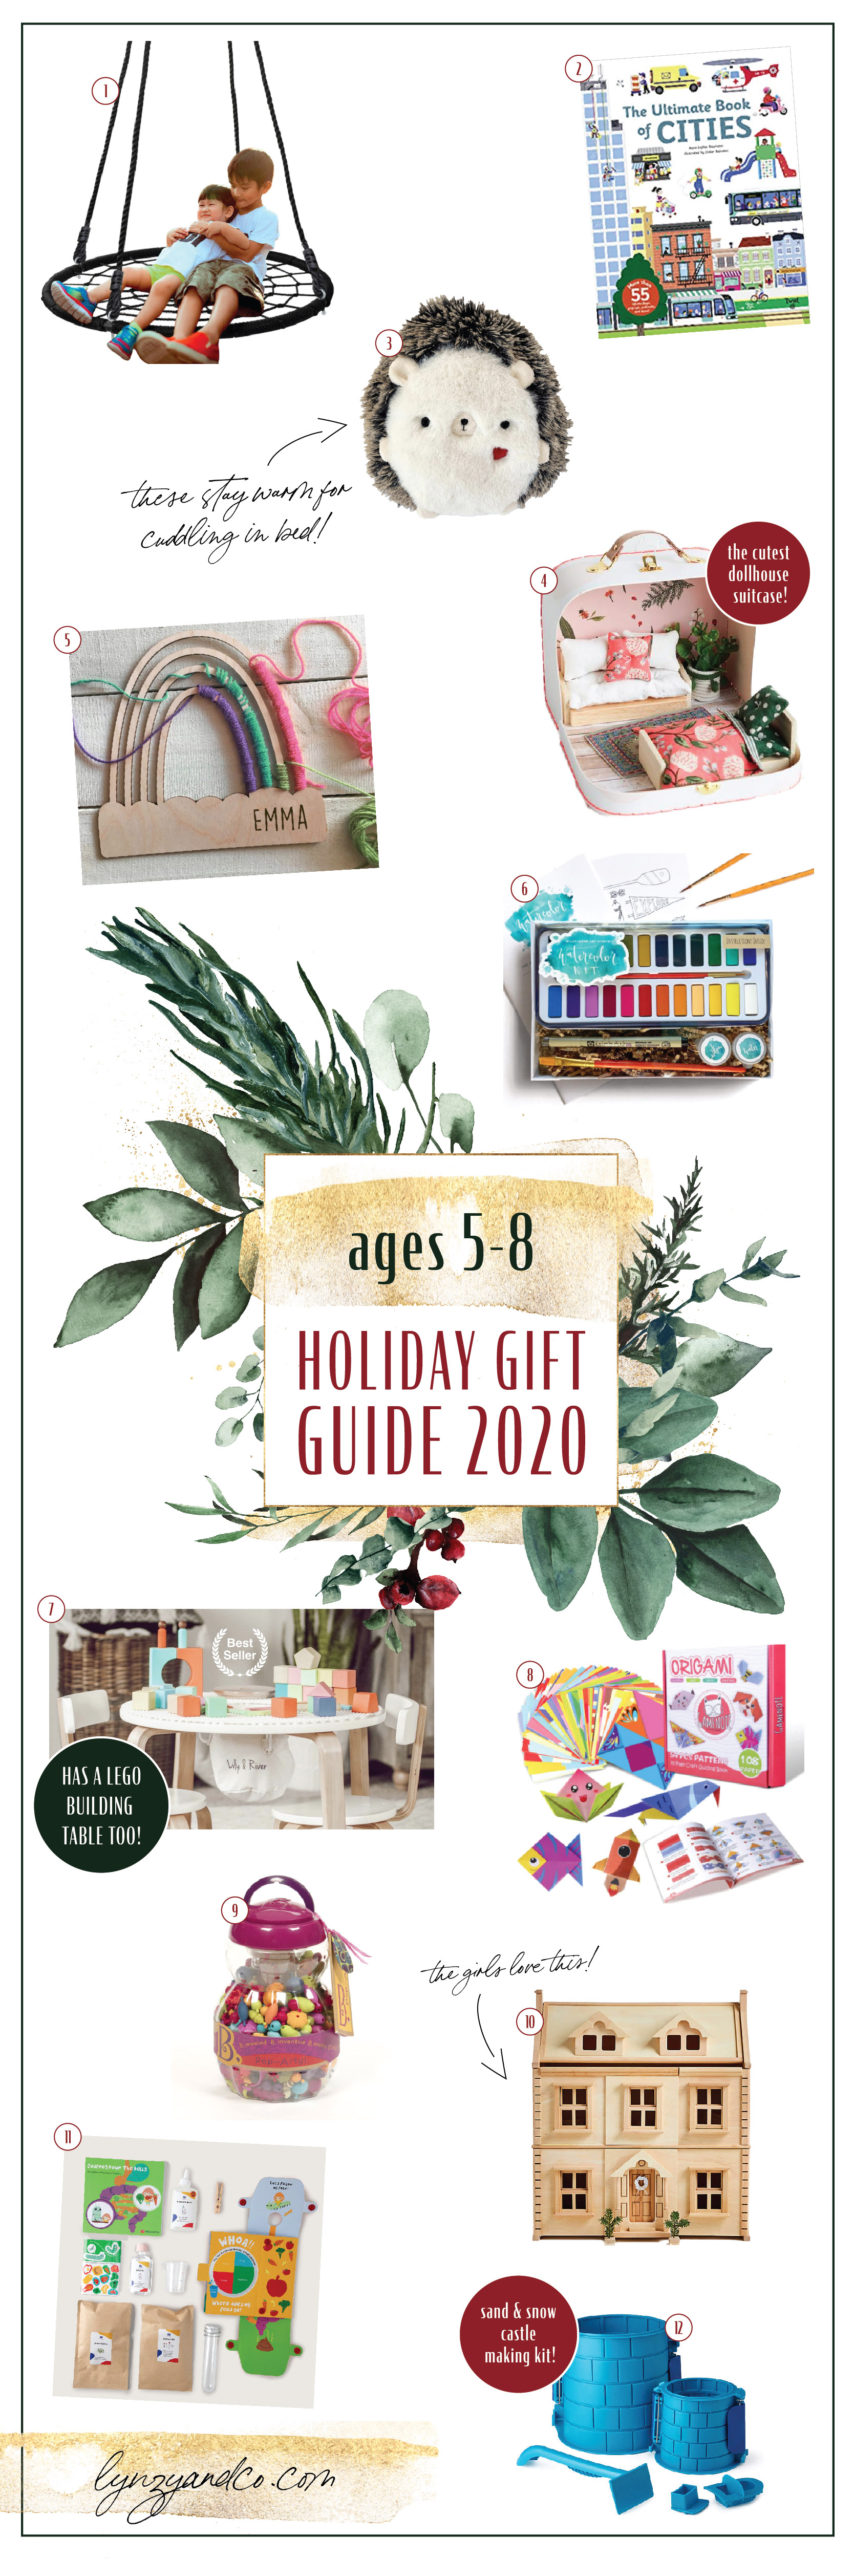 https://lynzyandco.com/wp-content/uploads/2020/11/LynzyandCo-HolidayGiftGuide2020-Ages5-8-scaled.jpg